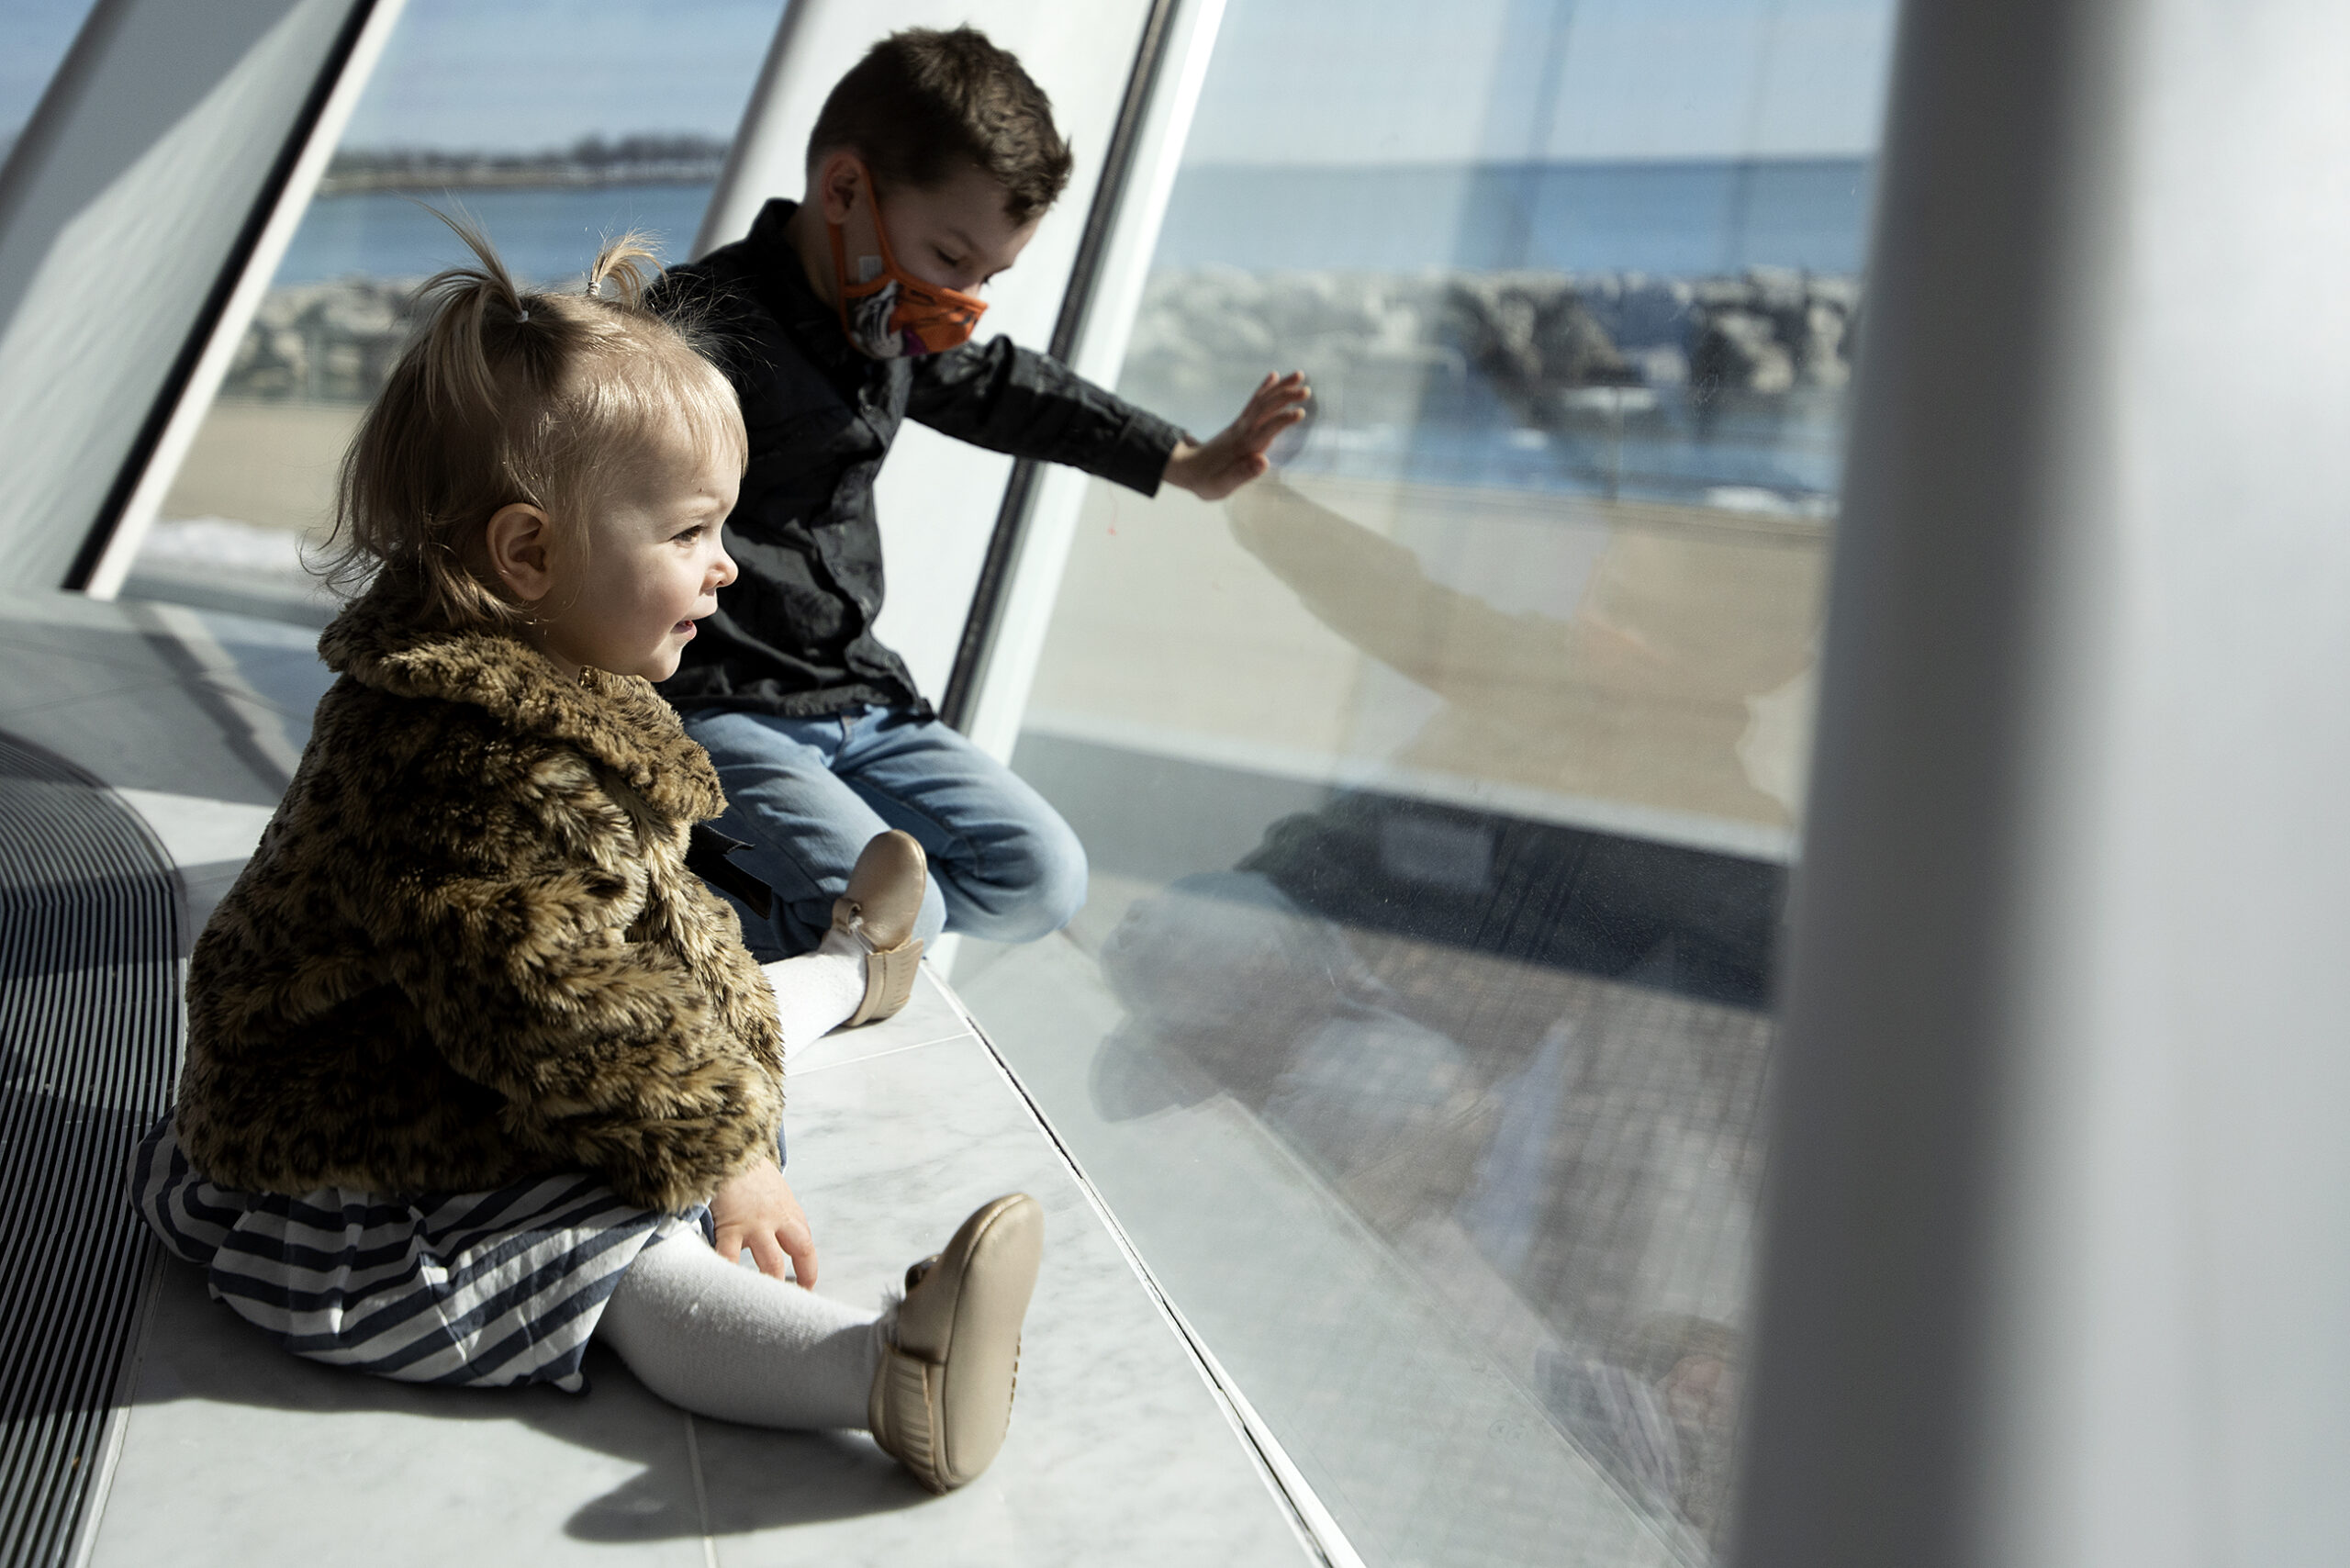 Sun shines on two children as they look out of a large window.